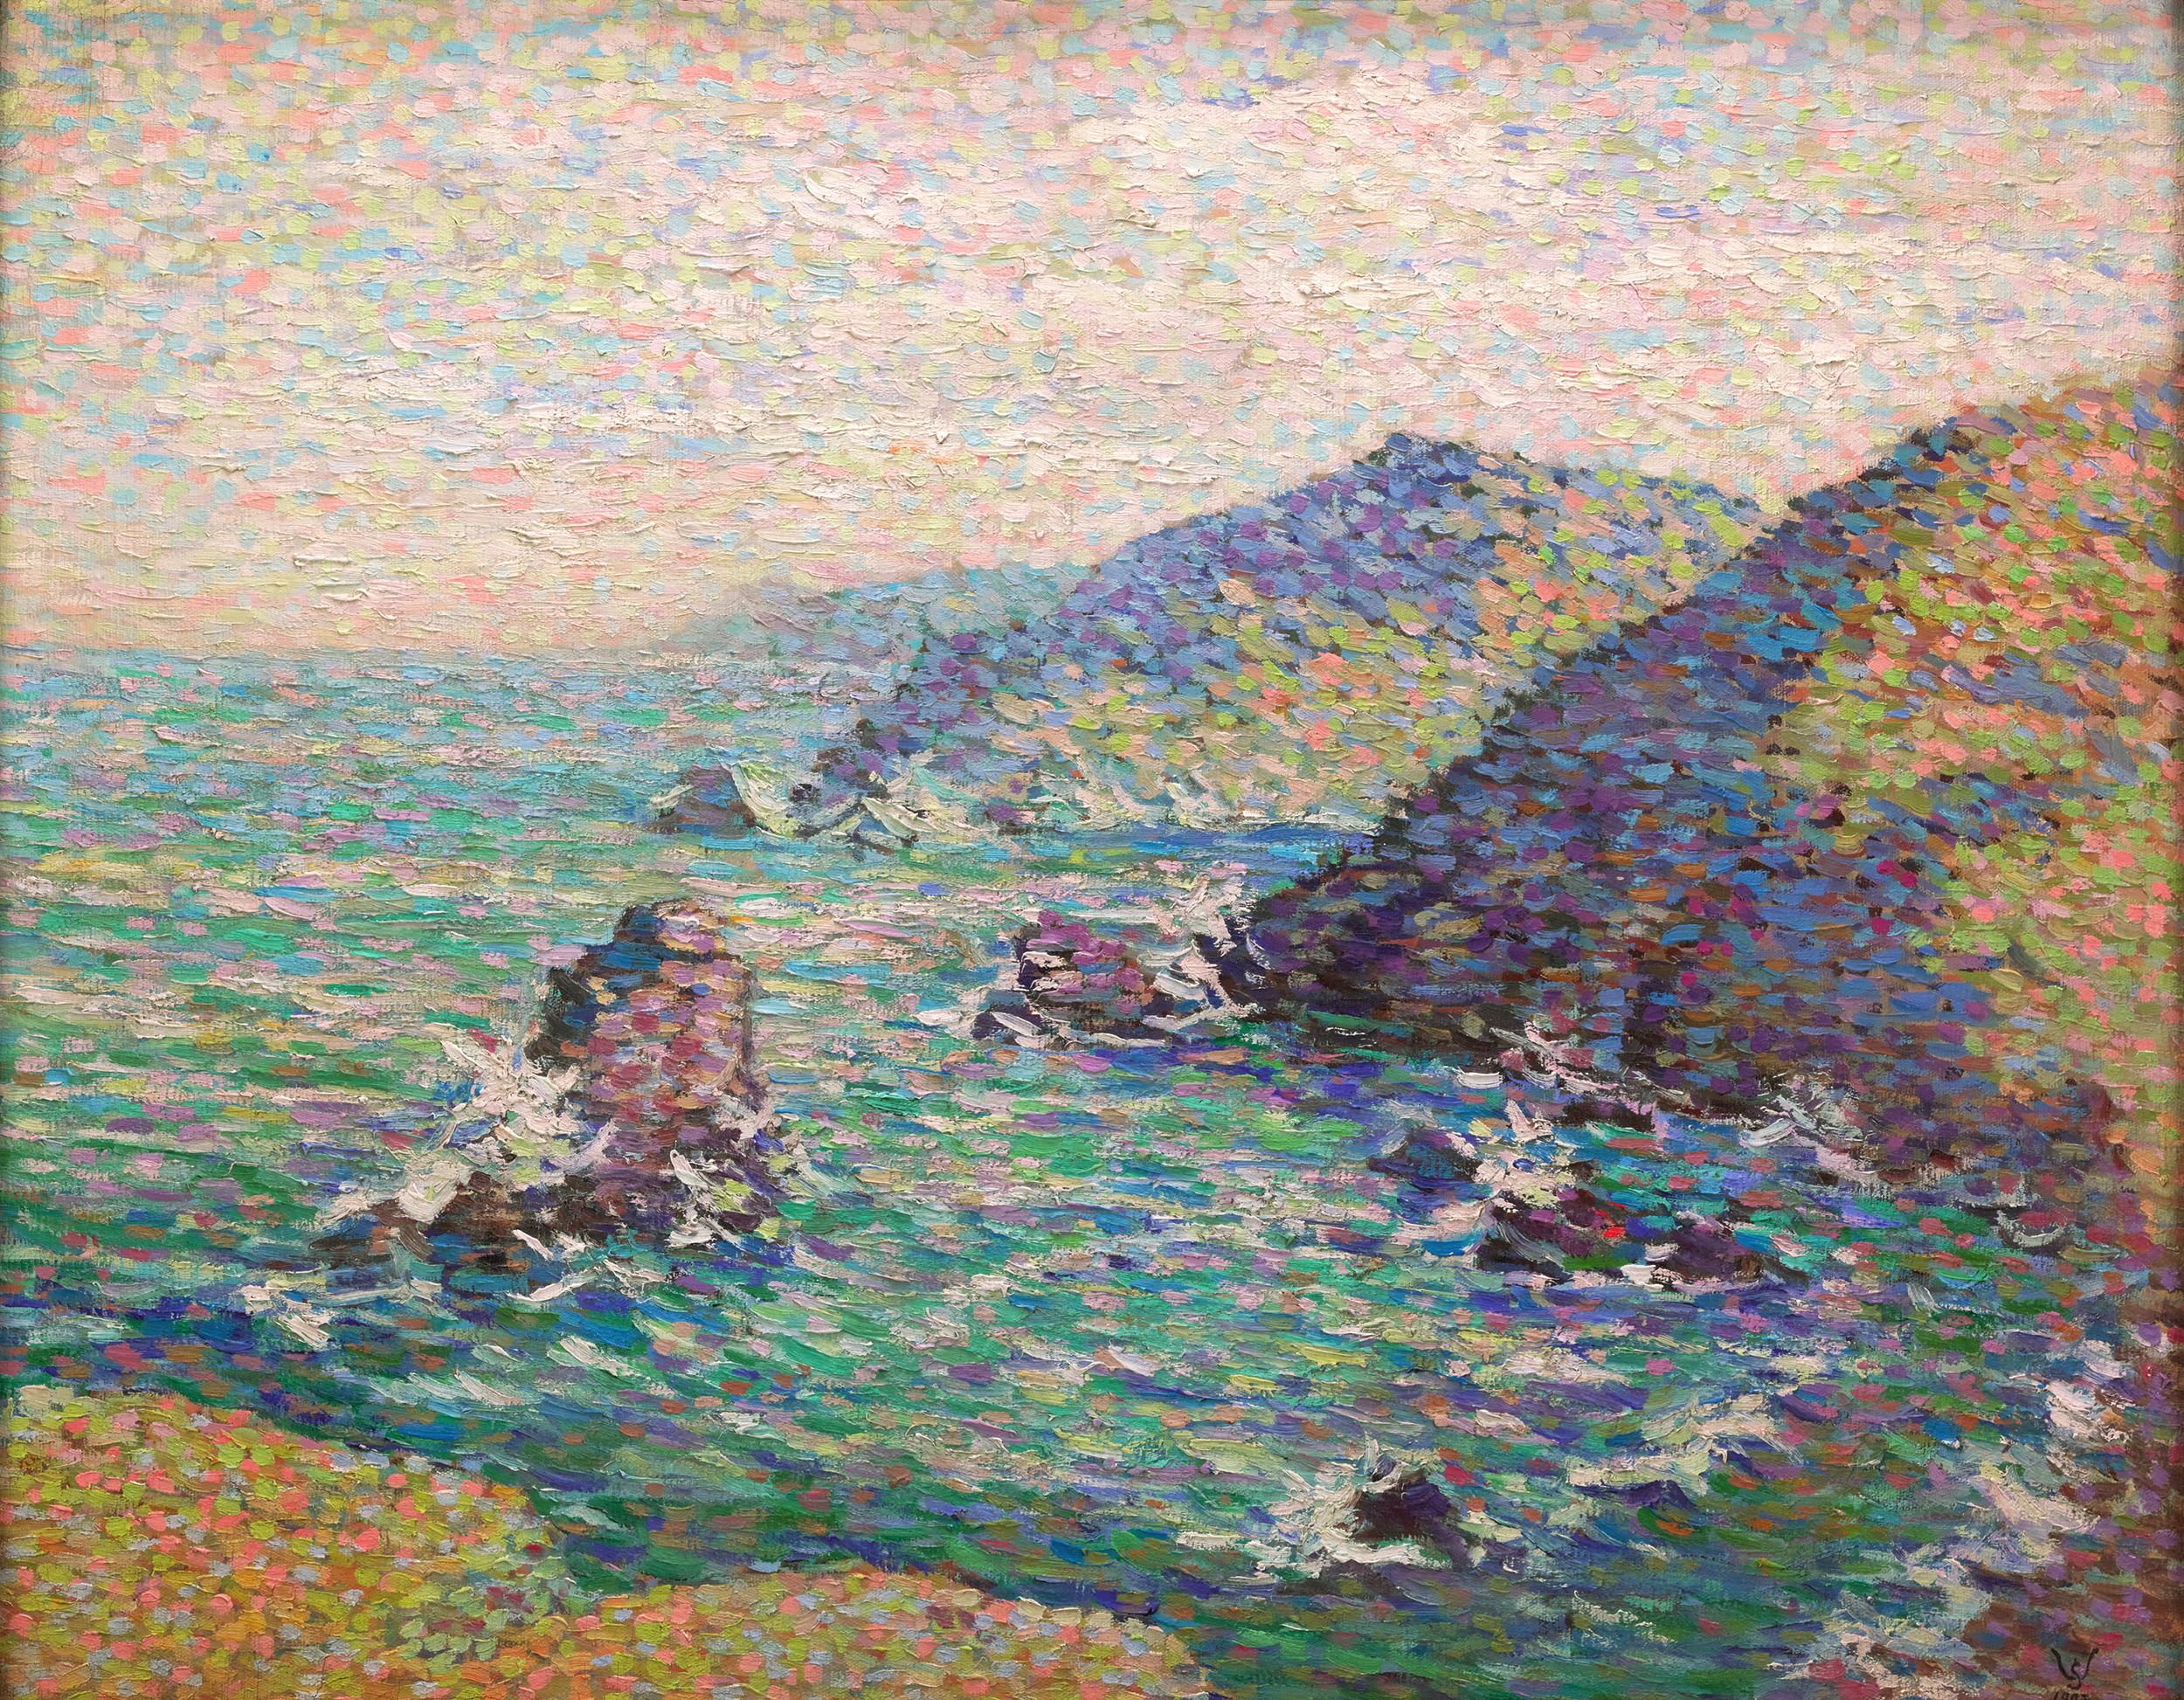 Willy Schlobach
1864-1951  Belgian

Les falaises
(The Cliffs)

Oil on canvas
Signed with artist’s monogram “W.S.” (lower right)

This coastal landscape showcases the bold palette and distinctive technique of Belgian painter Willy Schlobach. The